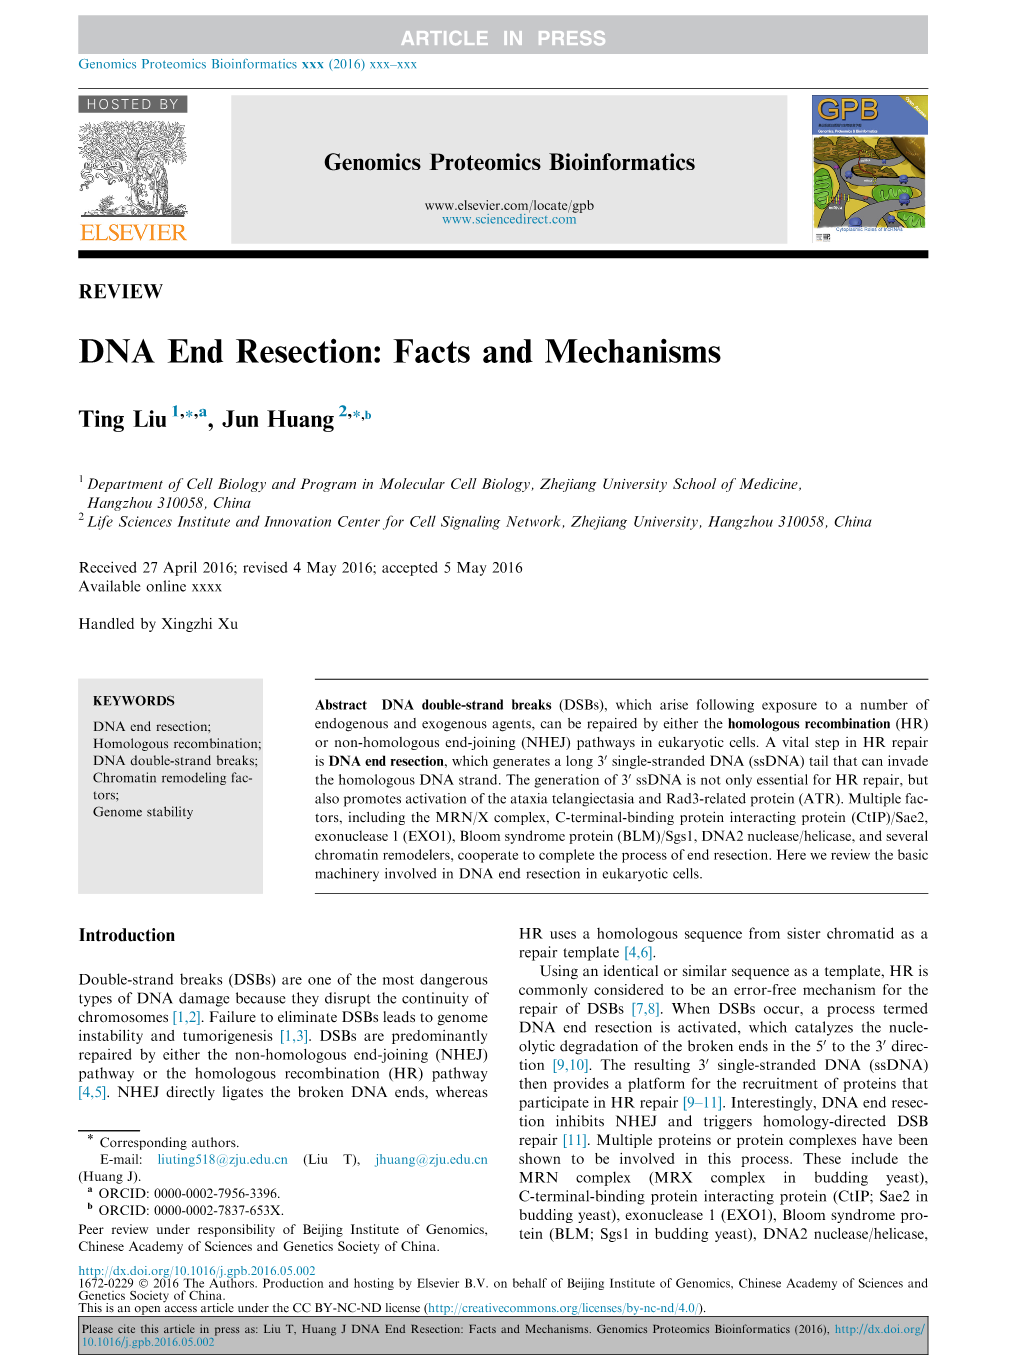 DNA End Resection: Facts and Mechanisms